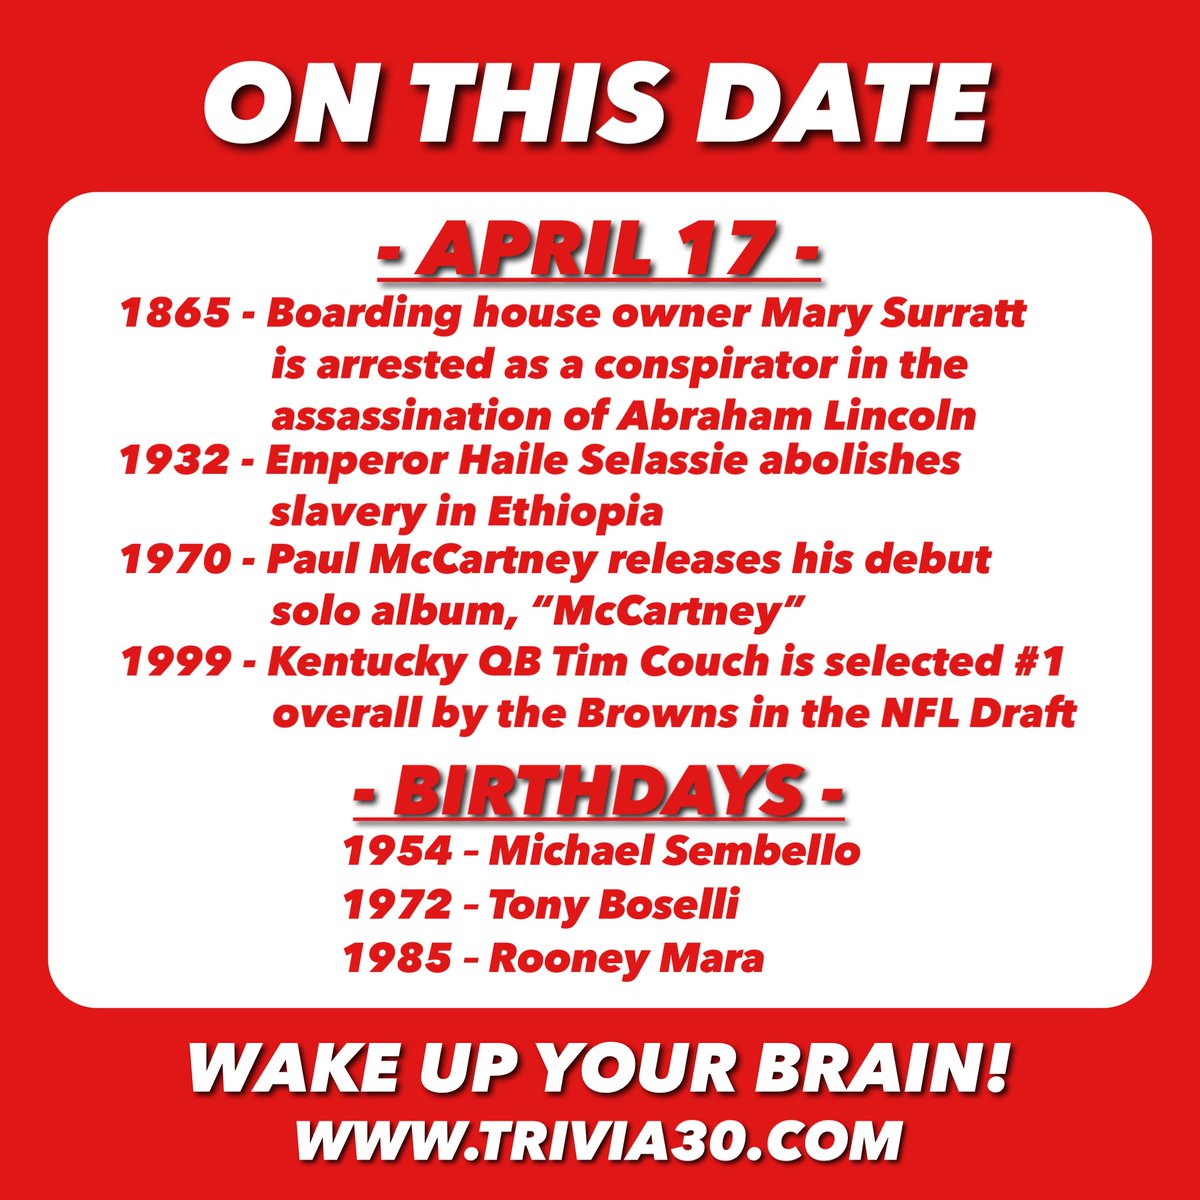 Your 4/17 OTD... Join us at Tidewater Grill or Disco Witch, and have a great Wednesday! #trivia30 #wakeupyourbrain #OnThisDay #Lincoln #Ethiopia #PaulMcCartney #clevelandbrowns #MichaelSembello #flashdance #TonyBoselli #JacksonvilleJaguars #RooneyMara